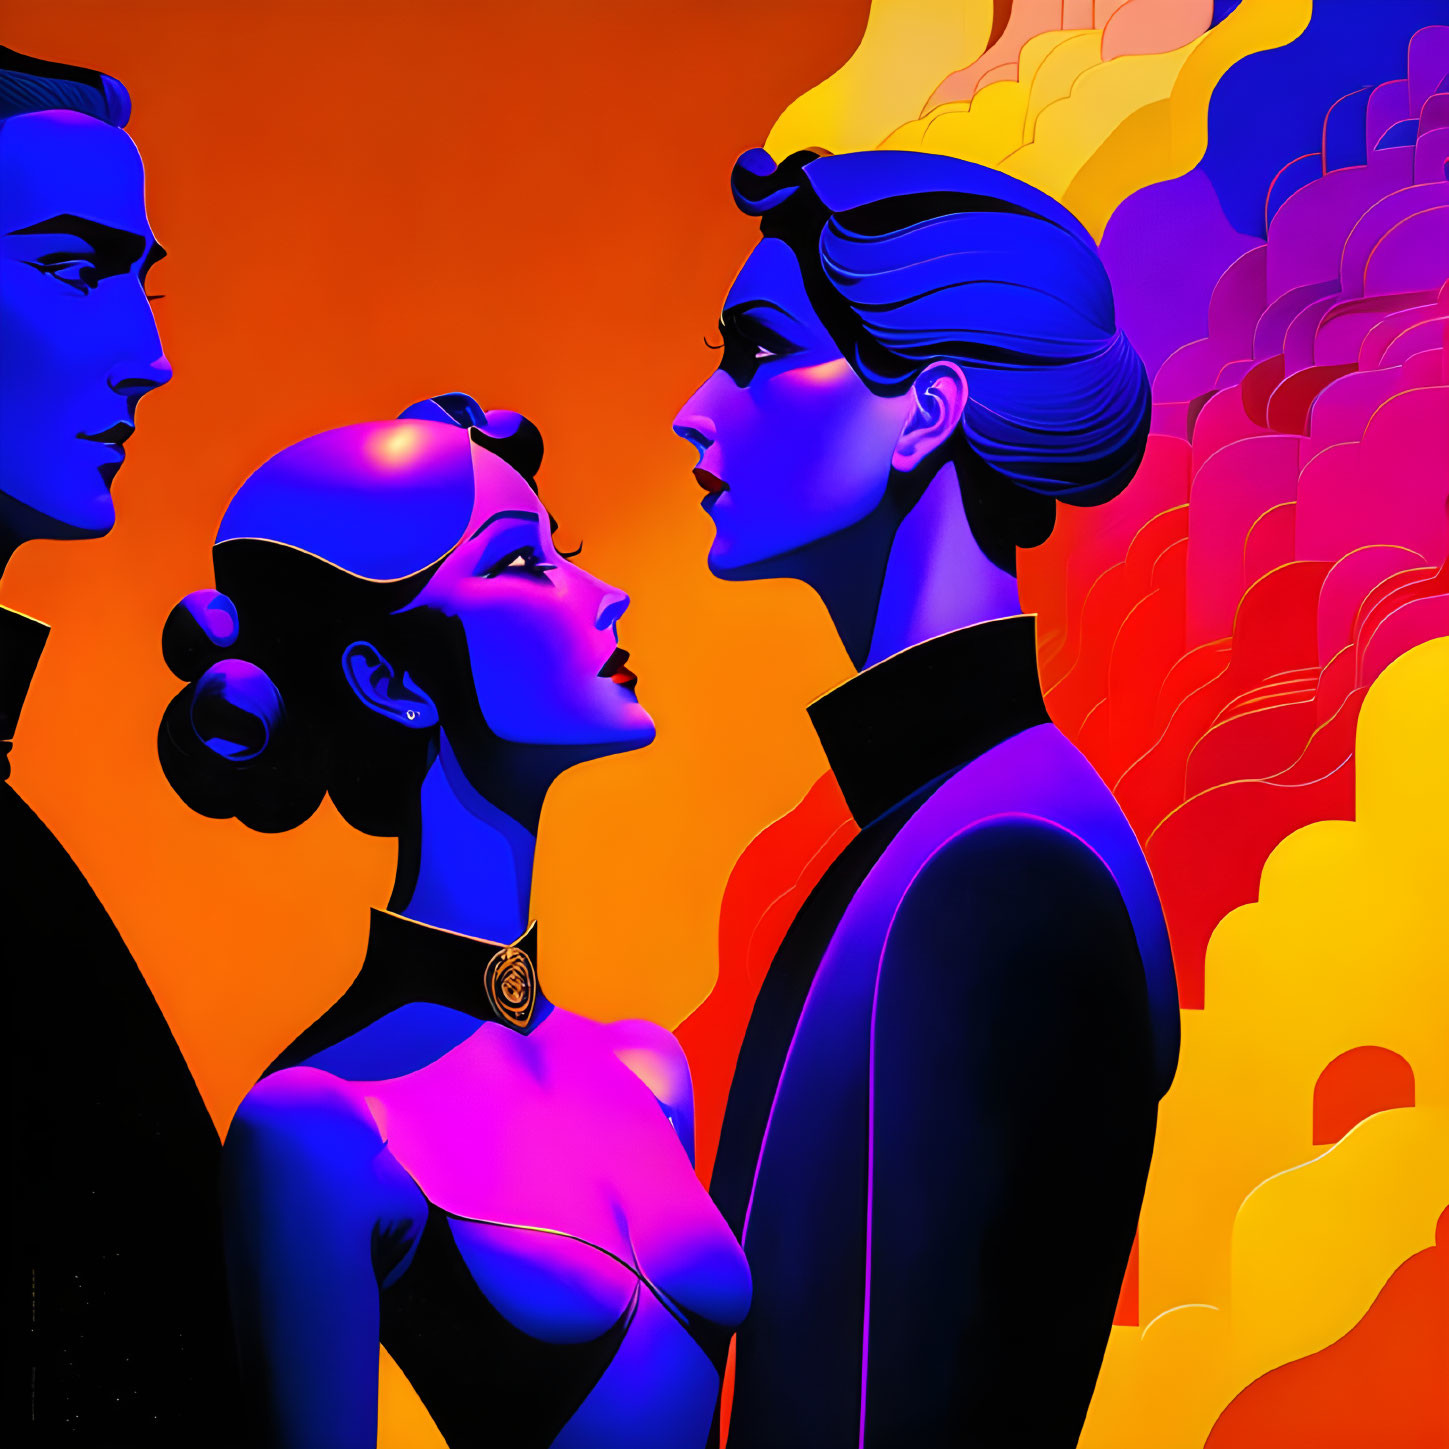 Colorful illustration: Two couples on vibrant background